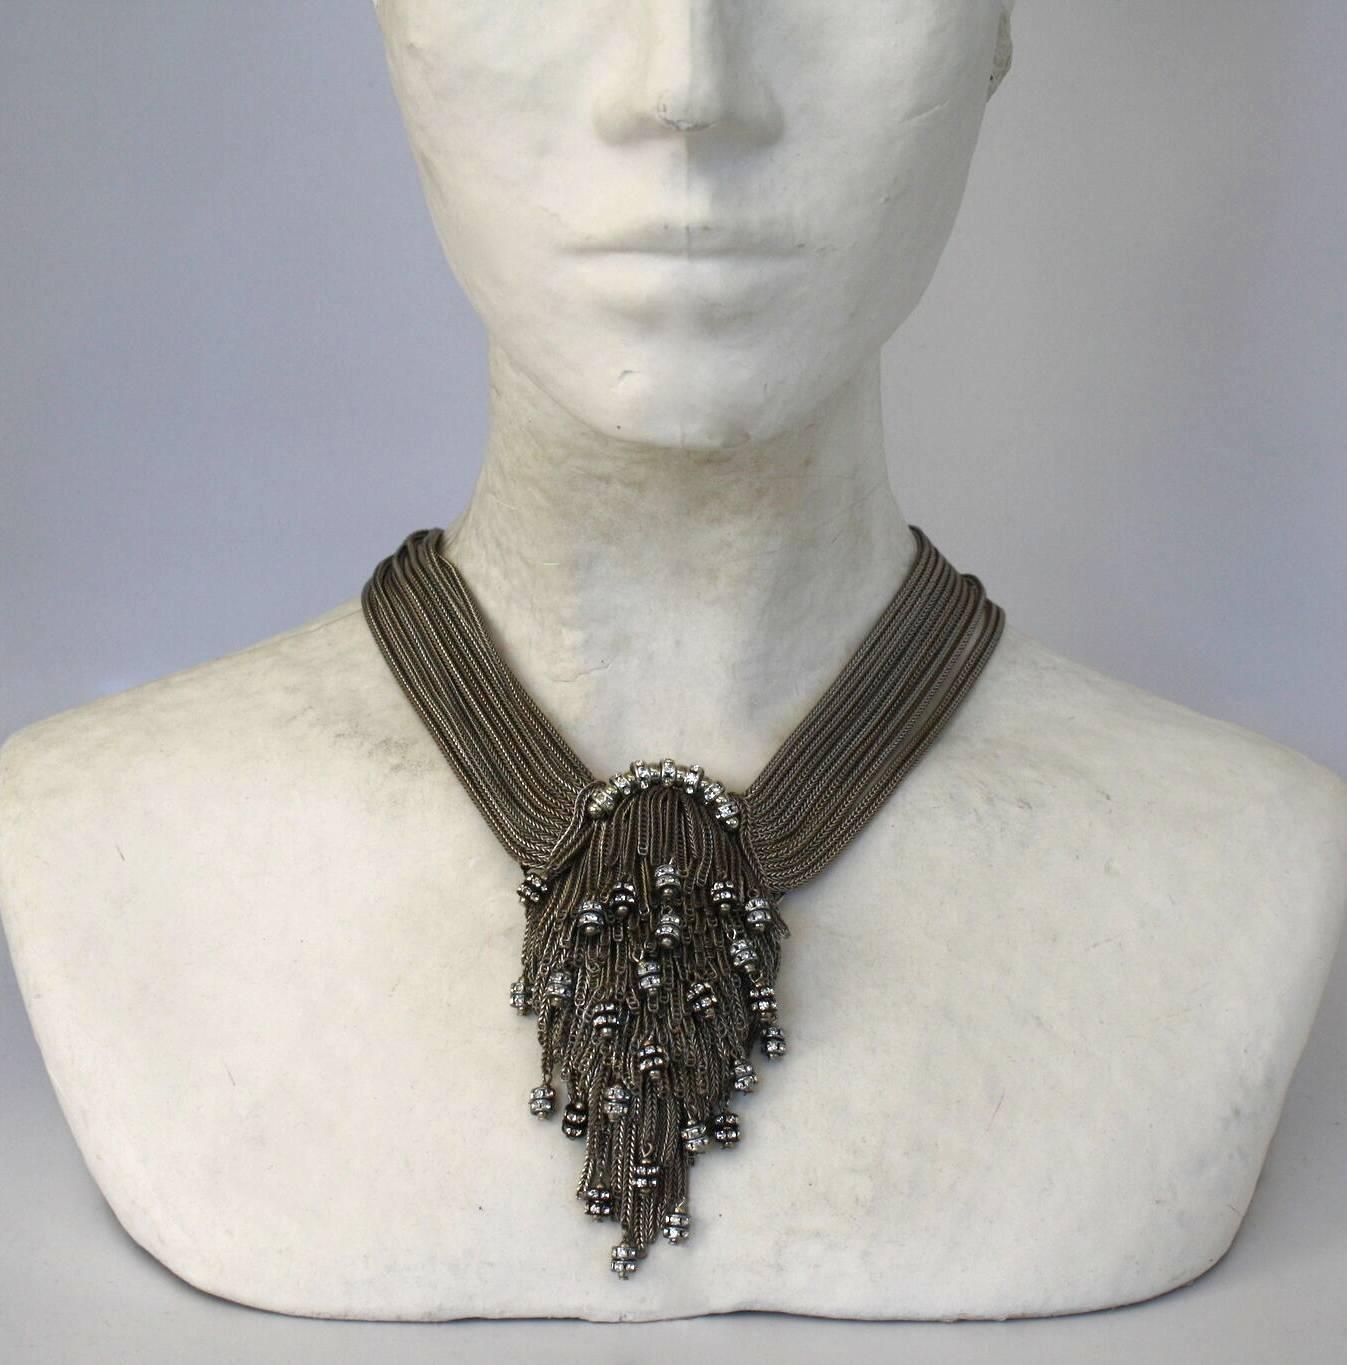 Rhodium chain necklace with cascade center and Swarovski crystal detailing from Francoise Montague. 